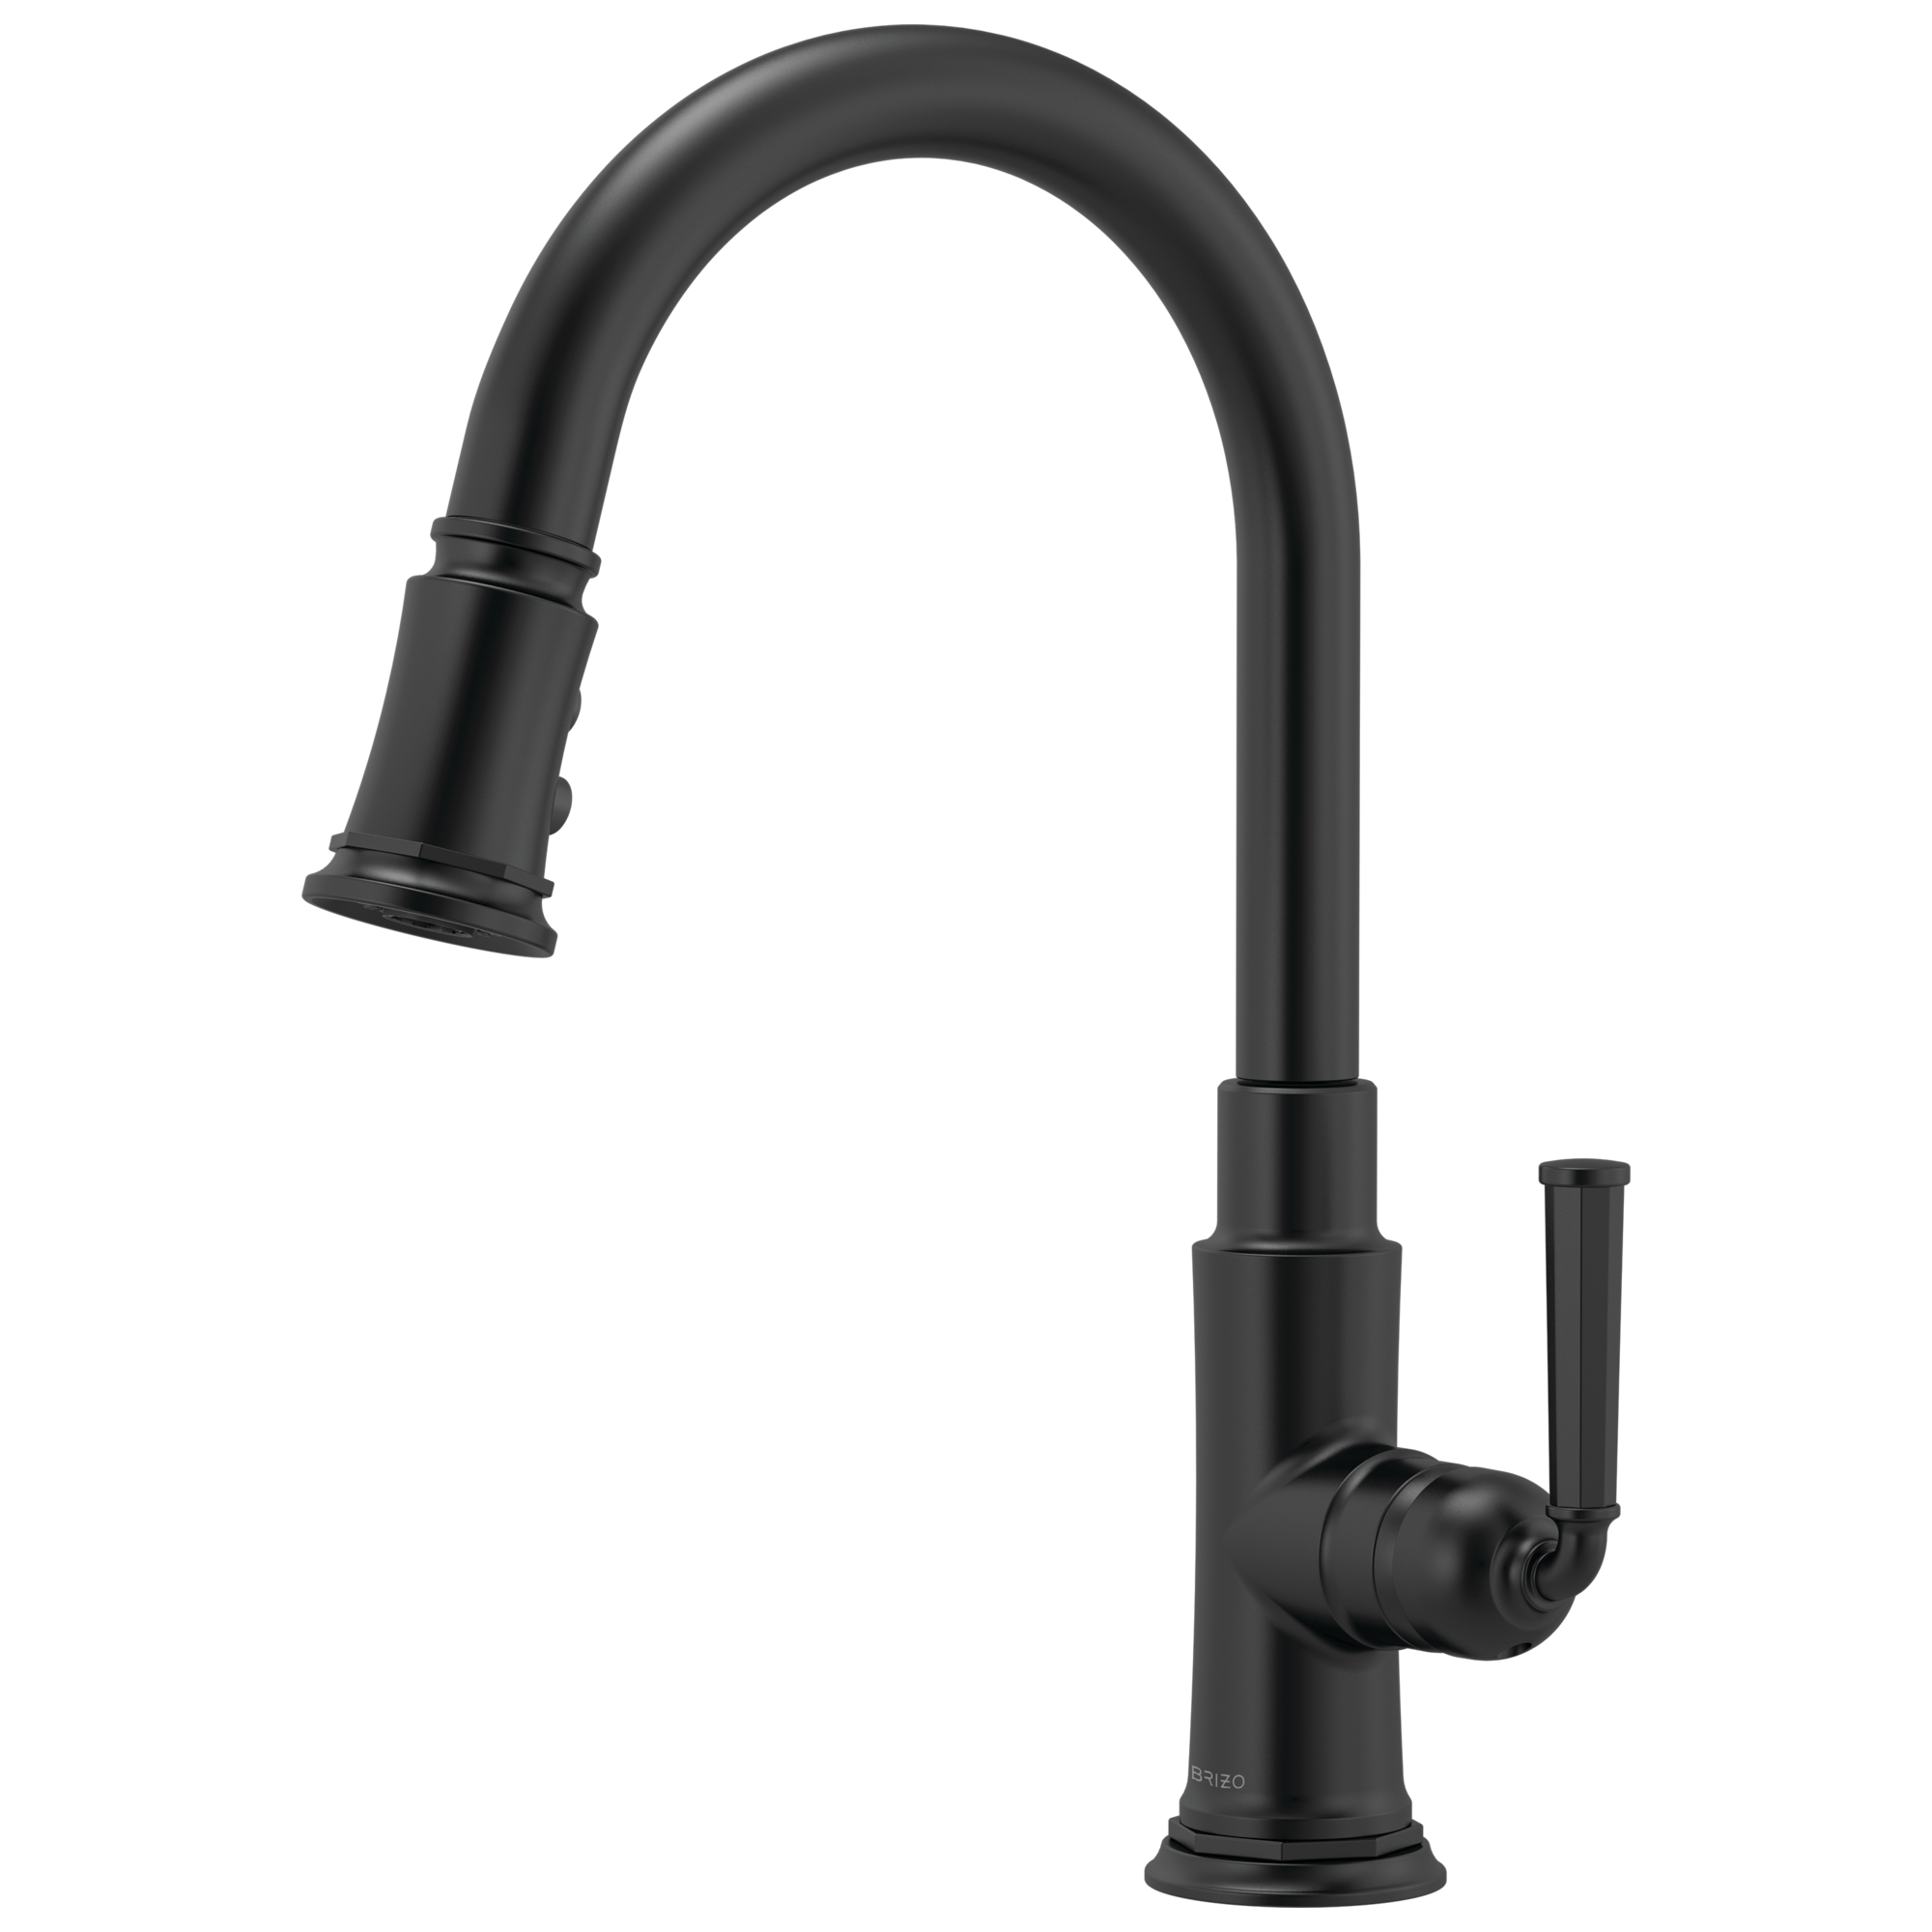 Brizo Rook Pull-Down Faucet